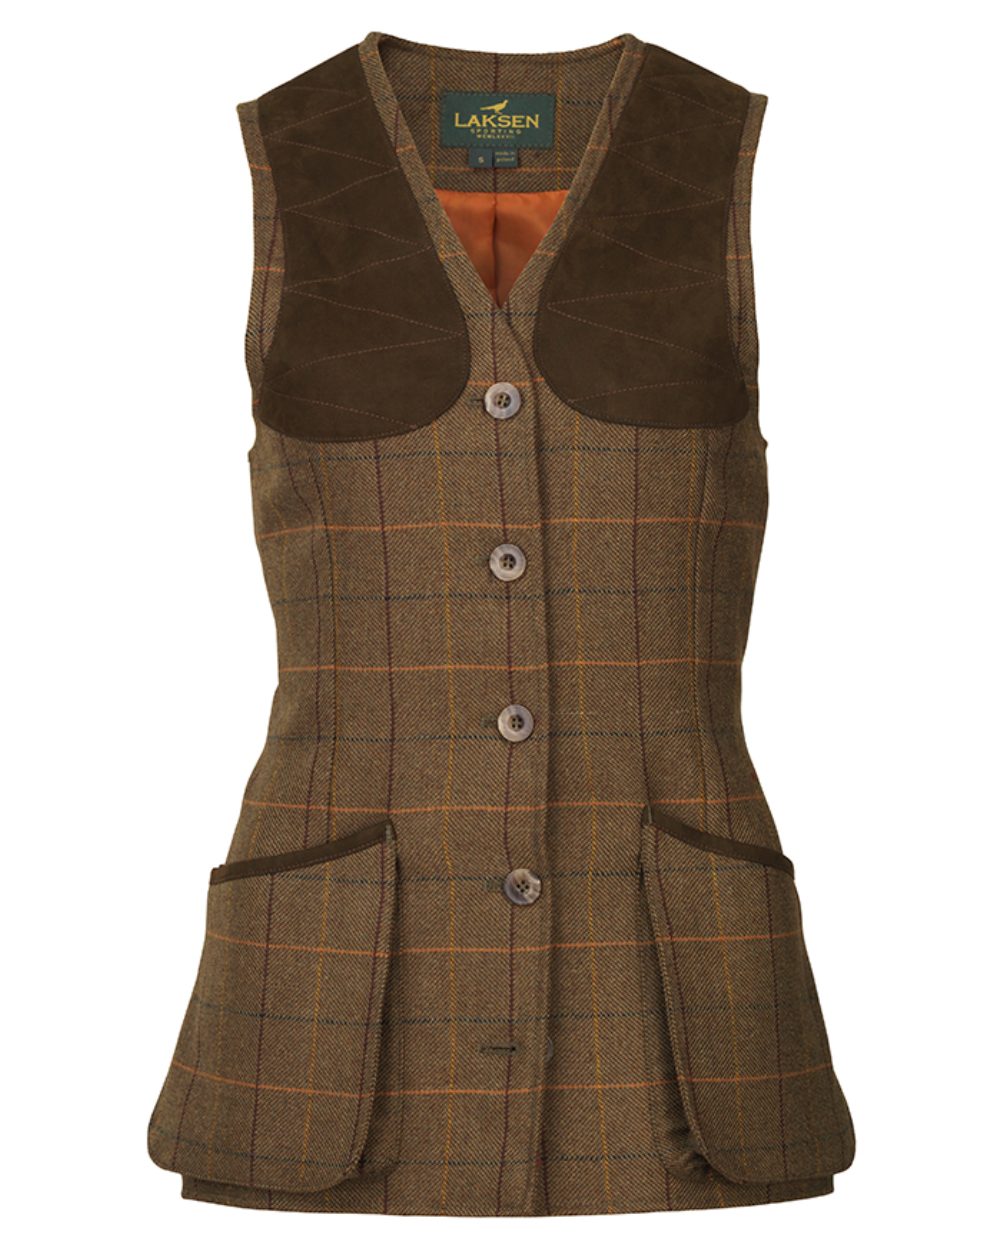 Laksen Cara Beauly Tweed Shooting Vest On A White Background